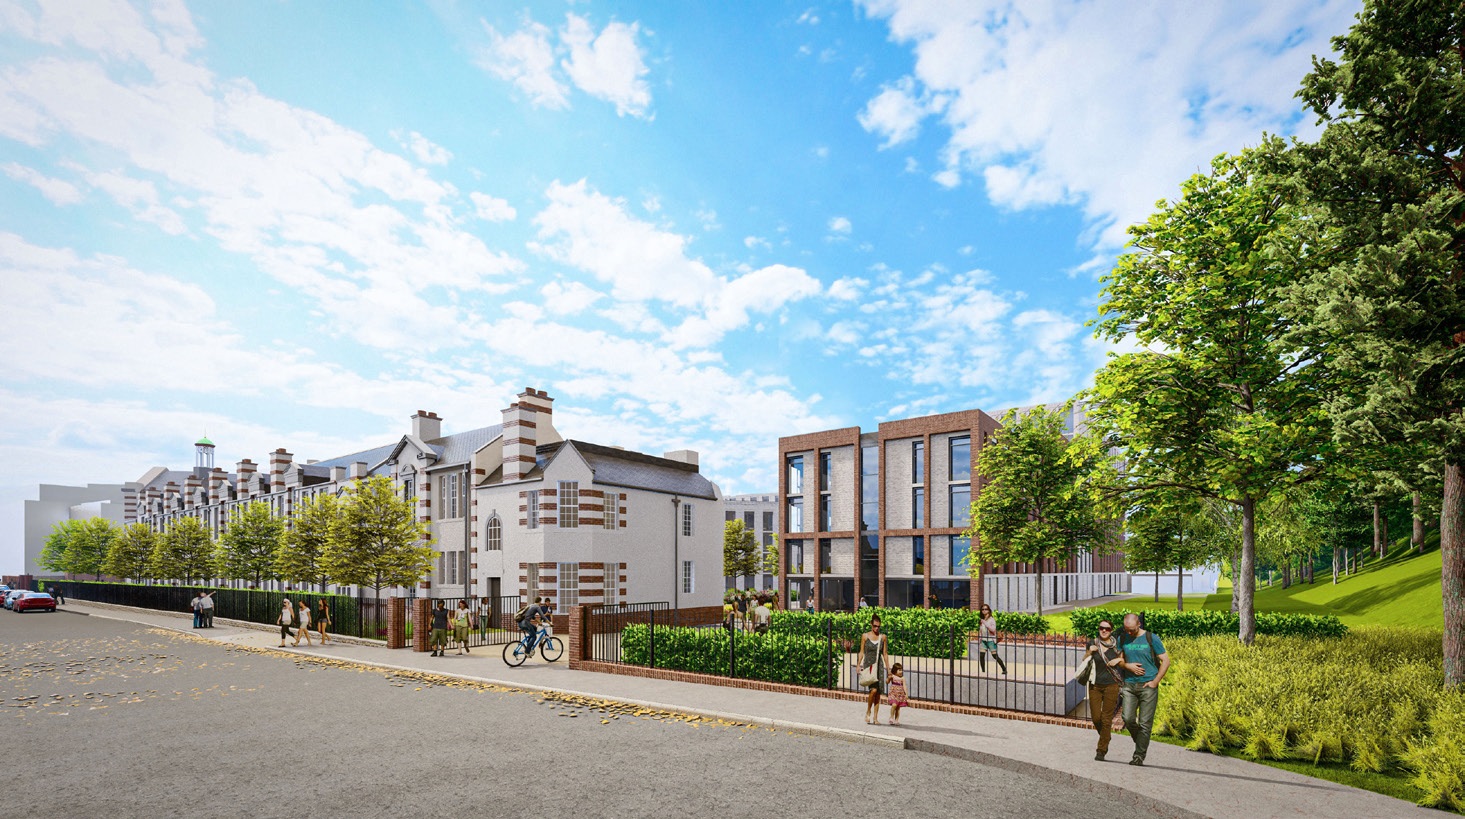 Planning permission granted for student development on former Tynecastle High School site